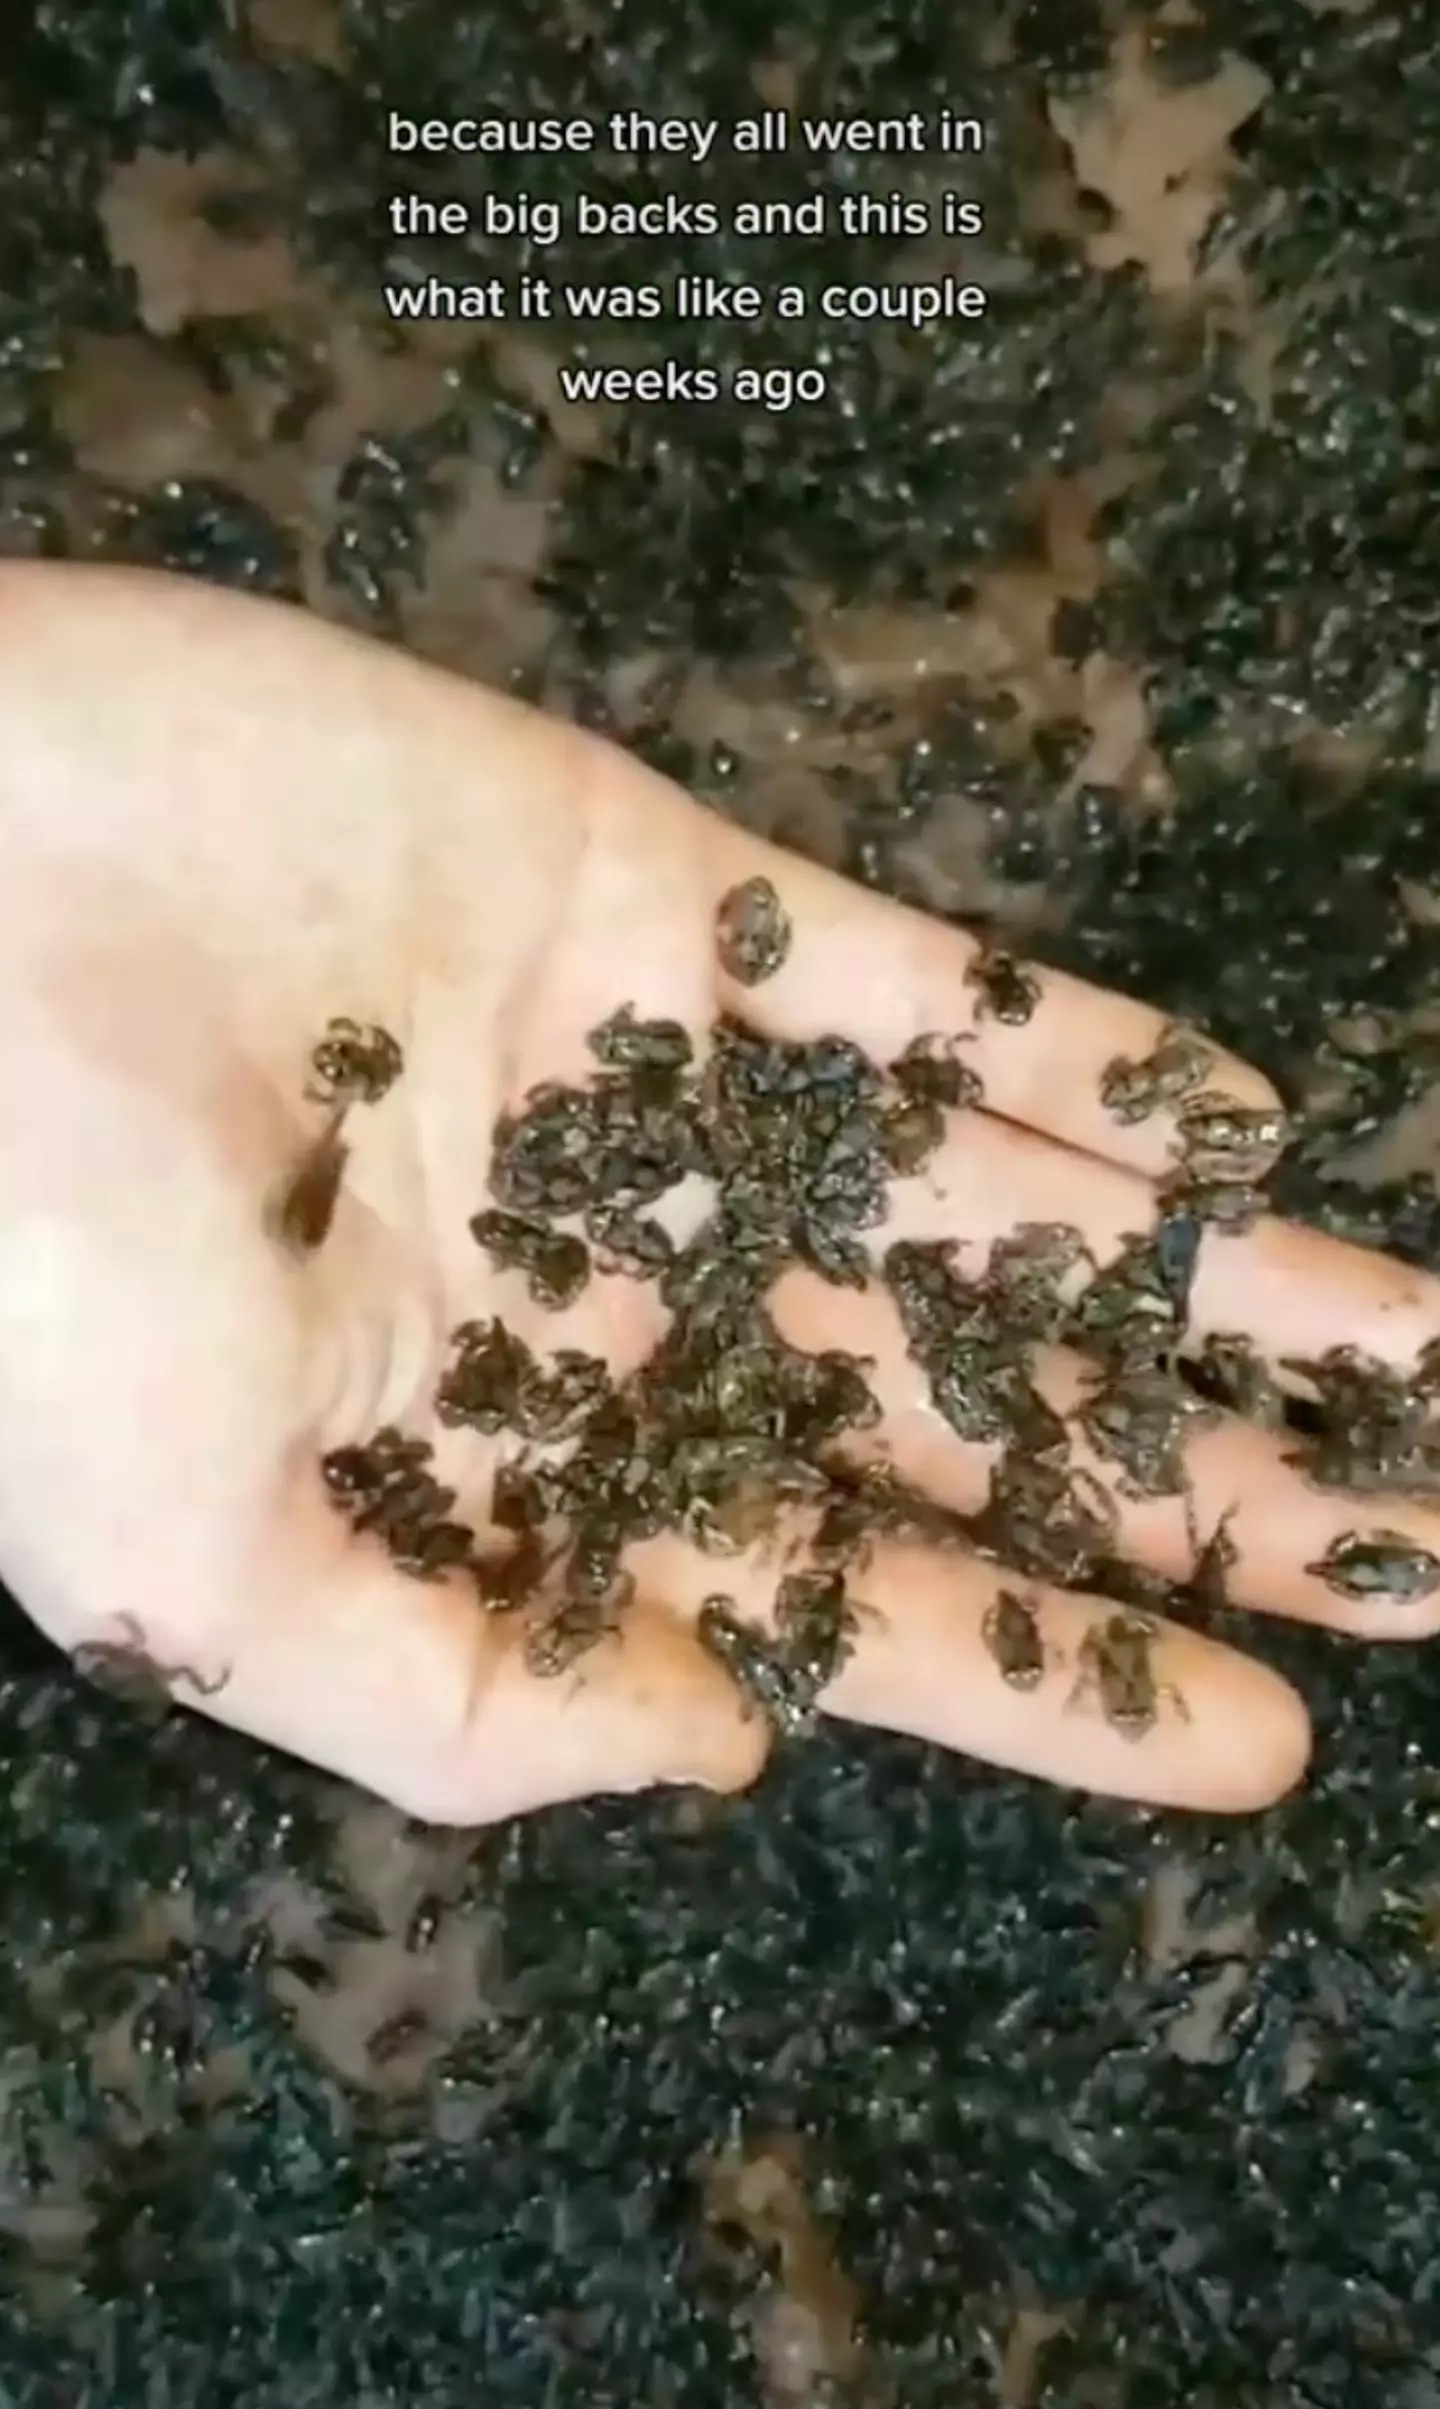 A TikToker went viral after claiming to have built a 'frog army'.